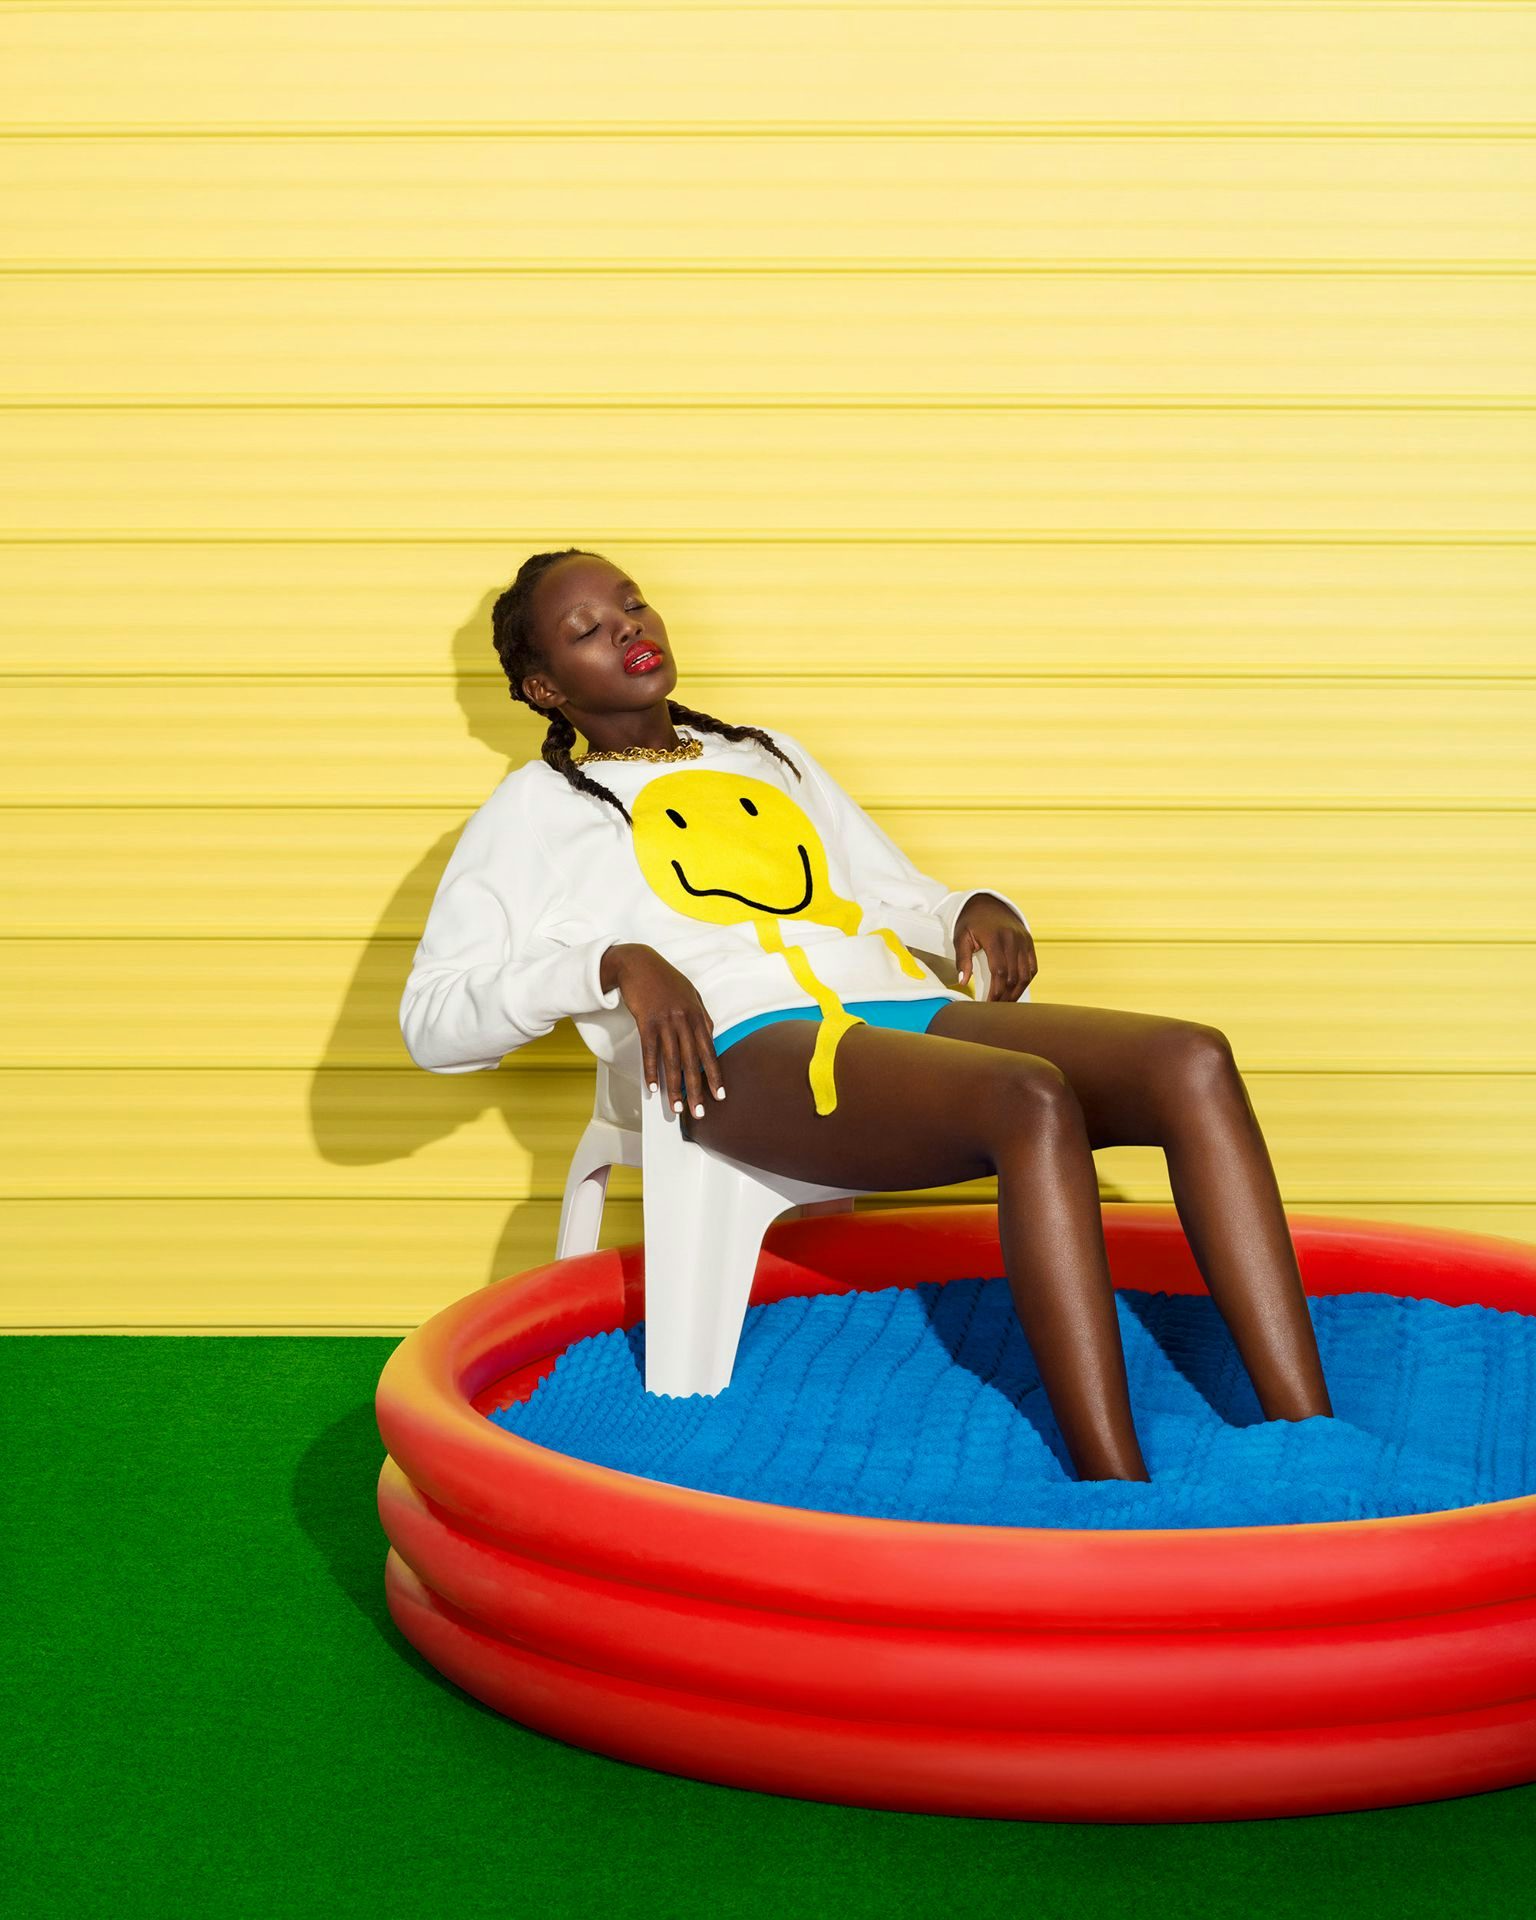 A woman relaxes in a red kiddie pool filled with blue balls, against a vibrant yellow corrugated wall backdrop, wearing a smiley face shirt.